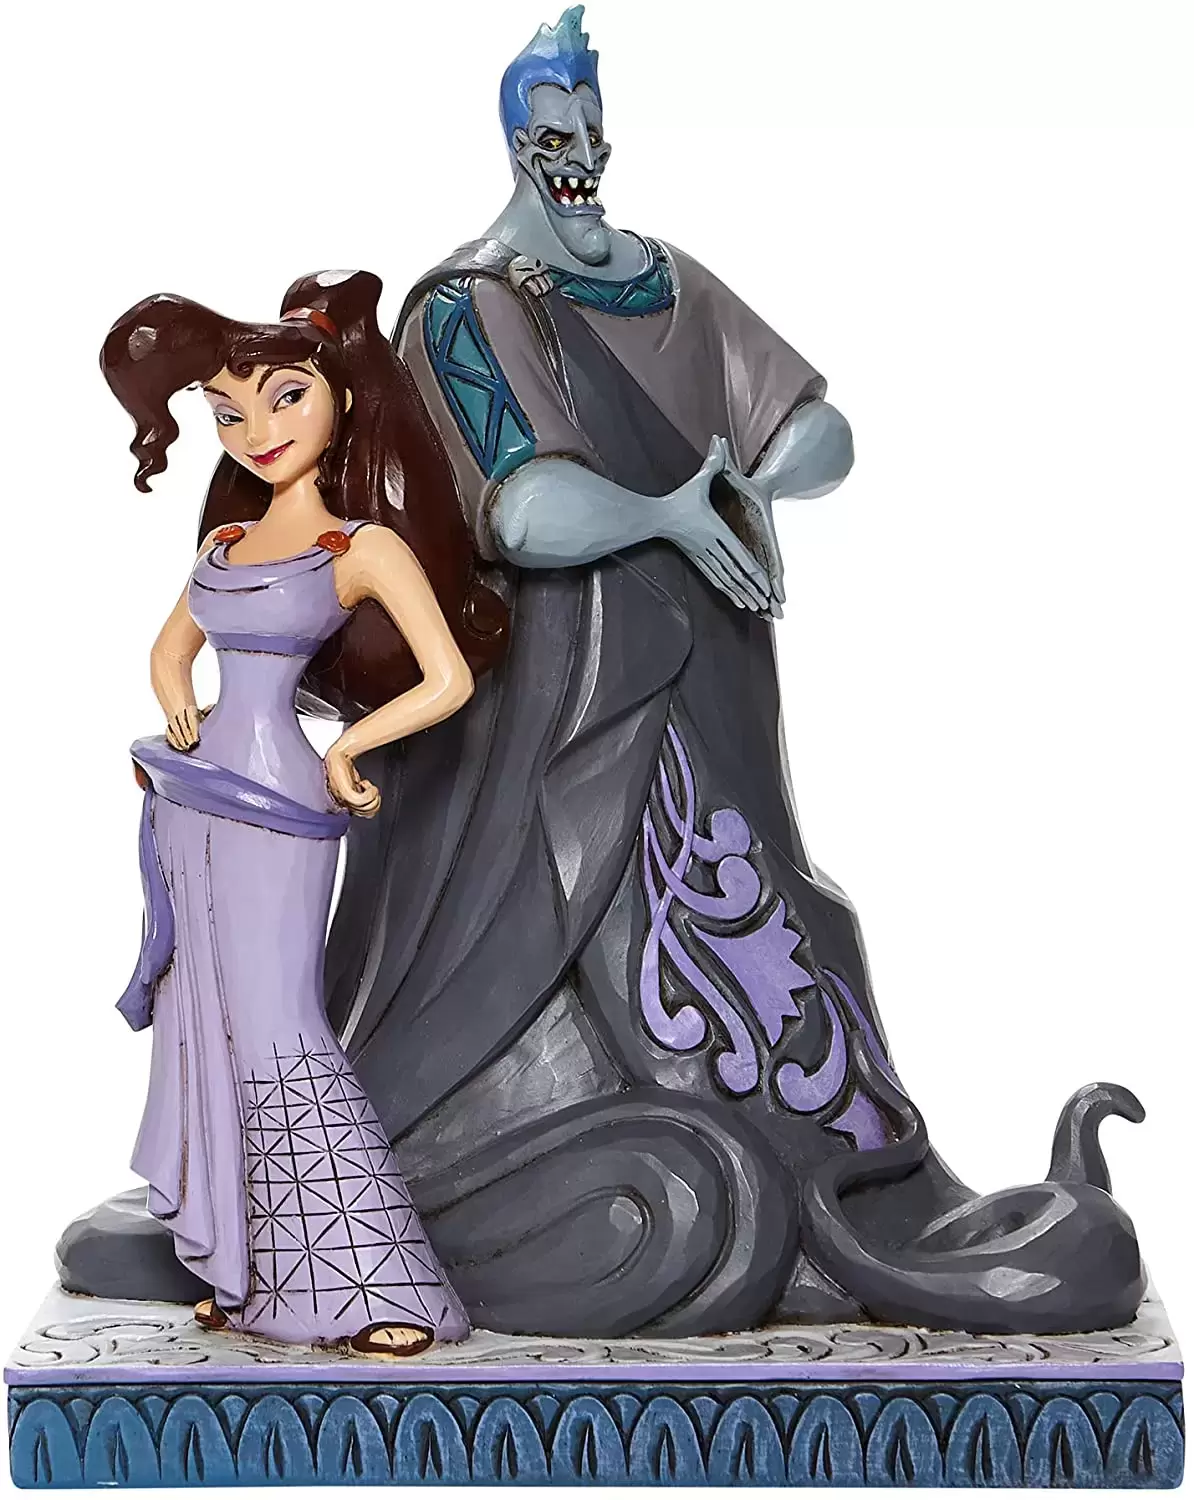 Disney Traditions by Jim Shore - Meg and Hades